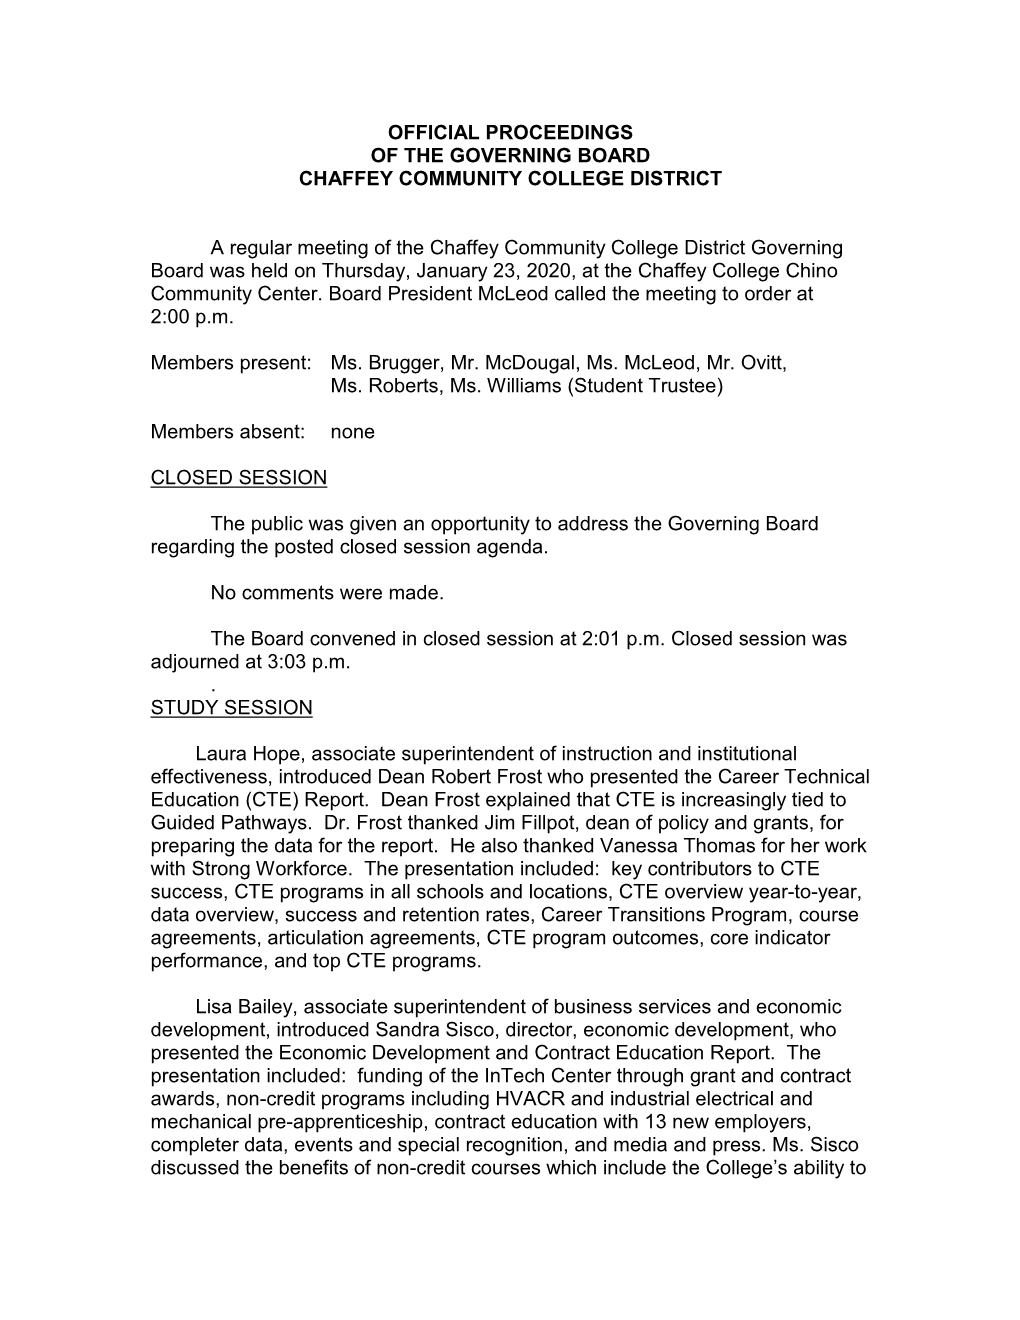 Official Proceedings of the Governing Board Chaffey Community College District